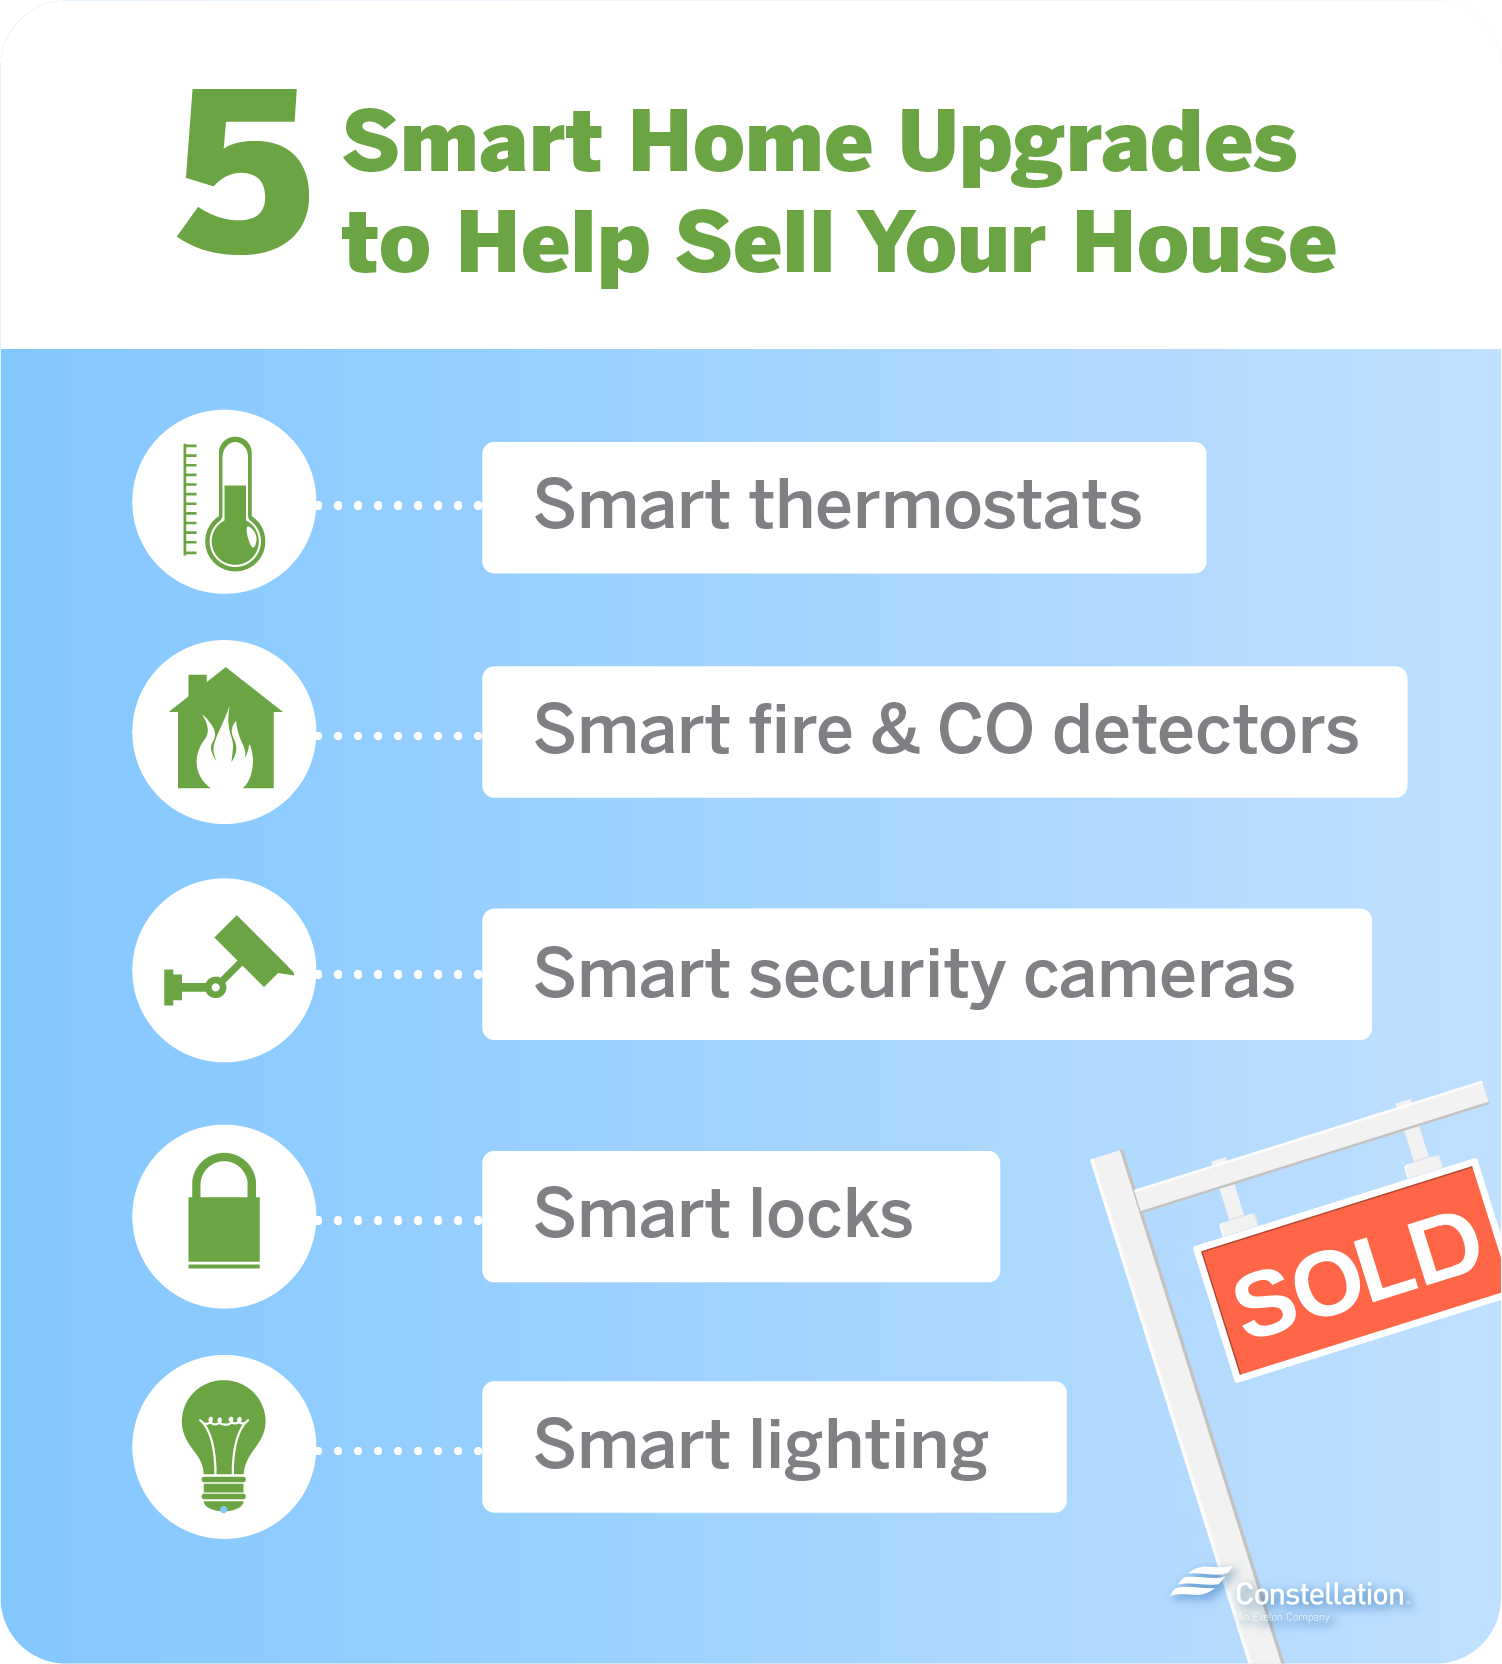 5 smart home upgrades to help sell your house